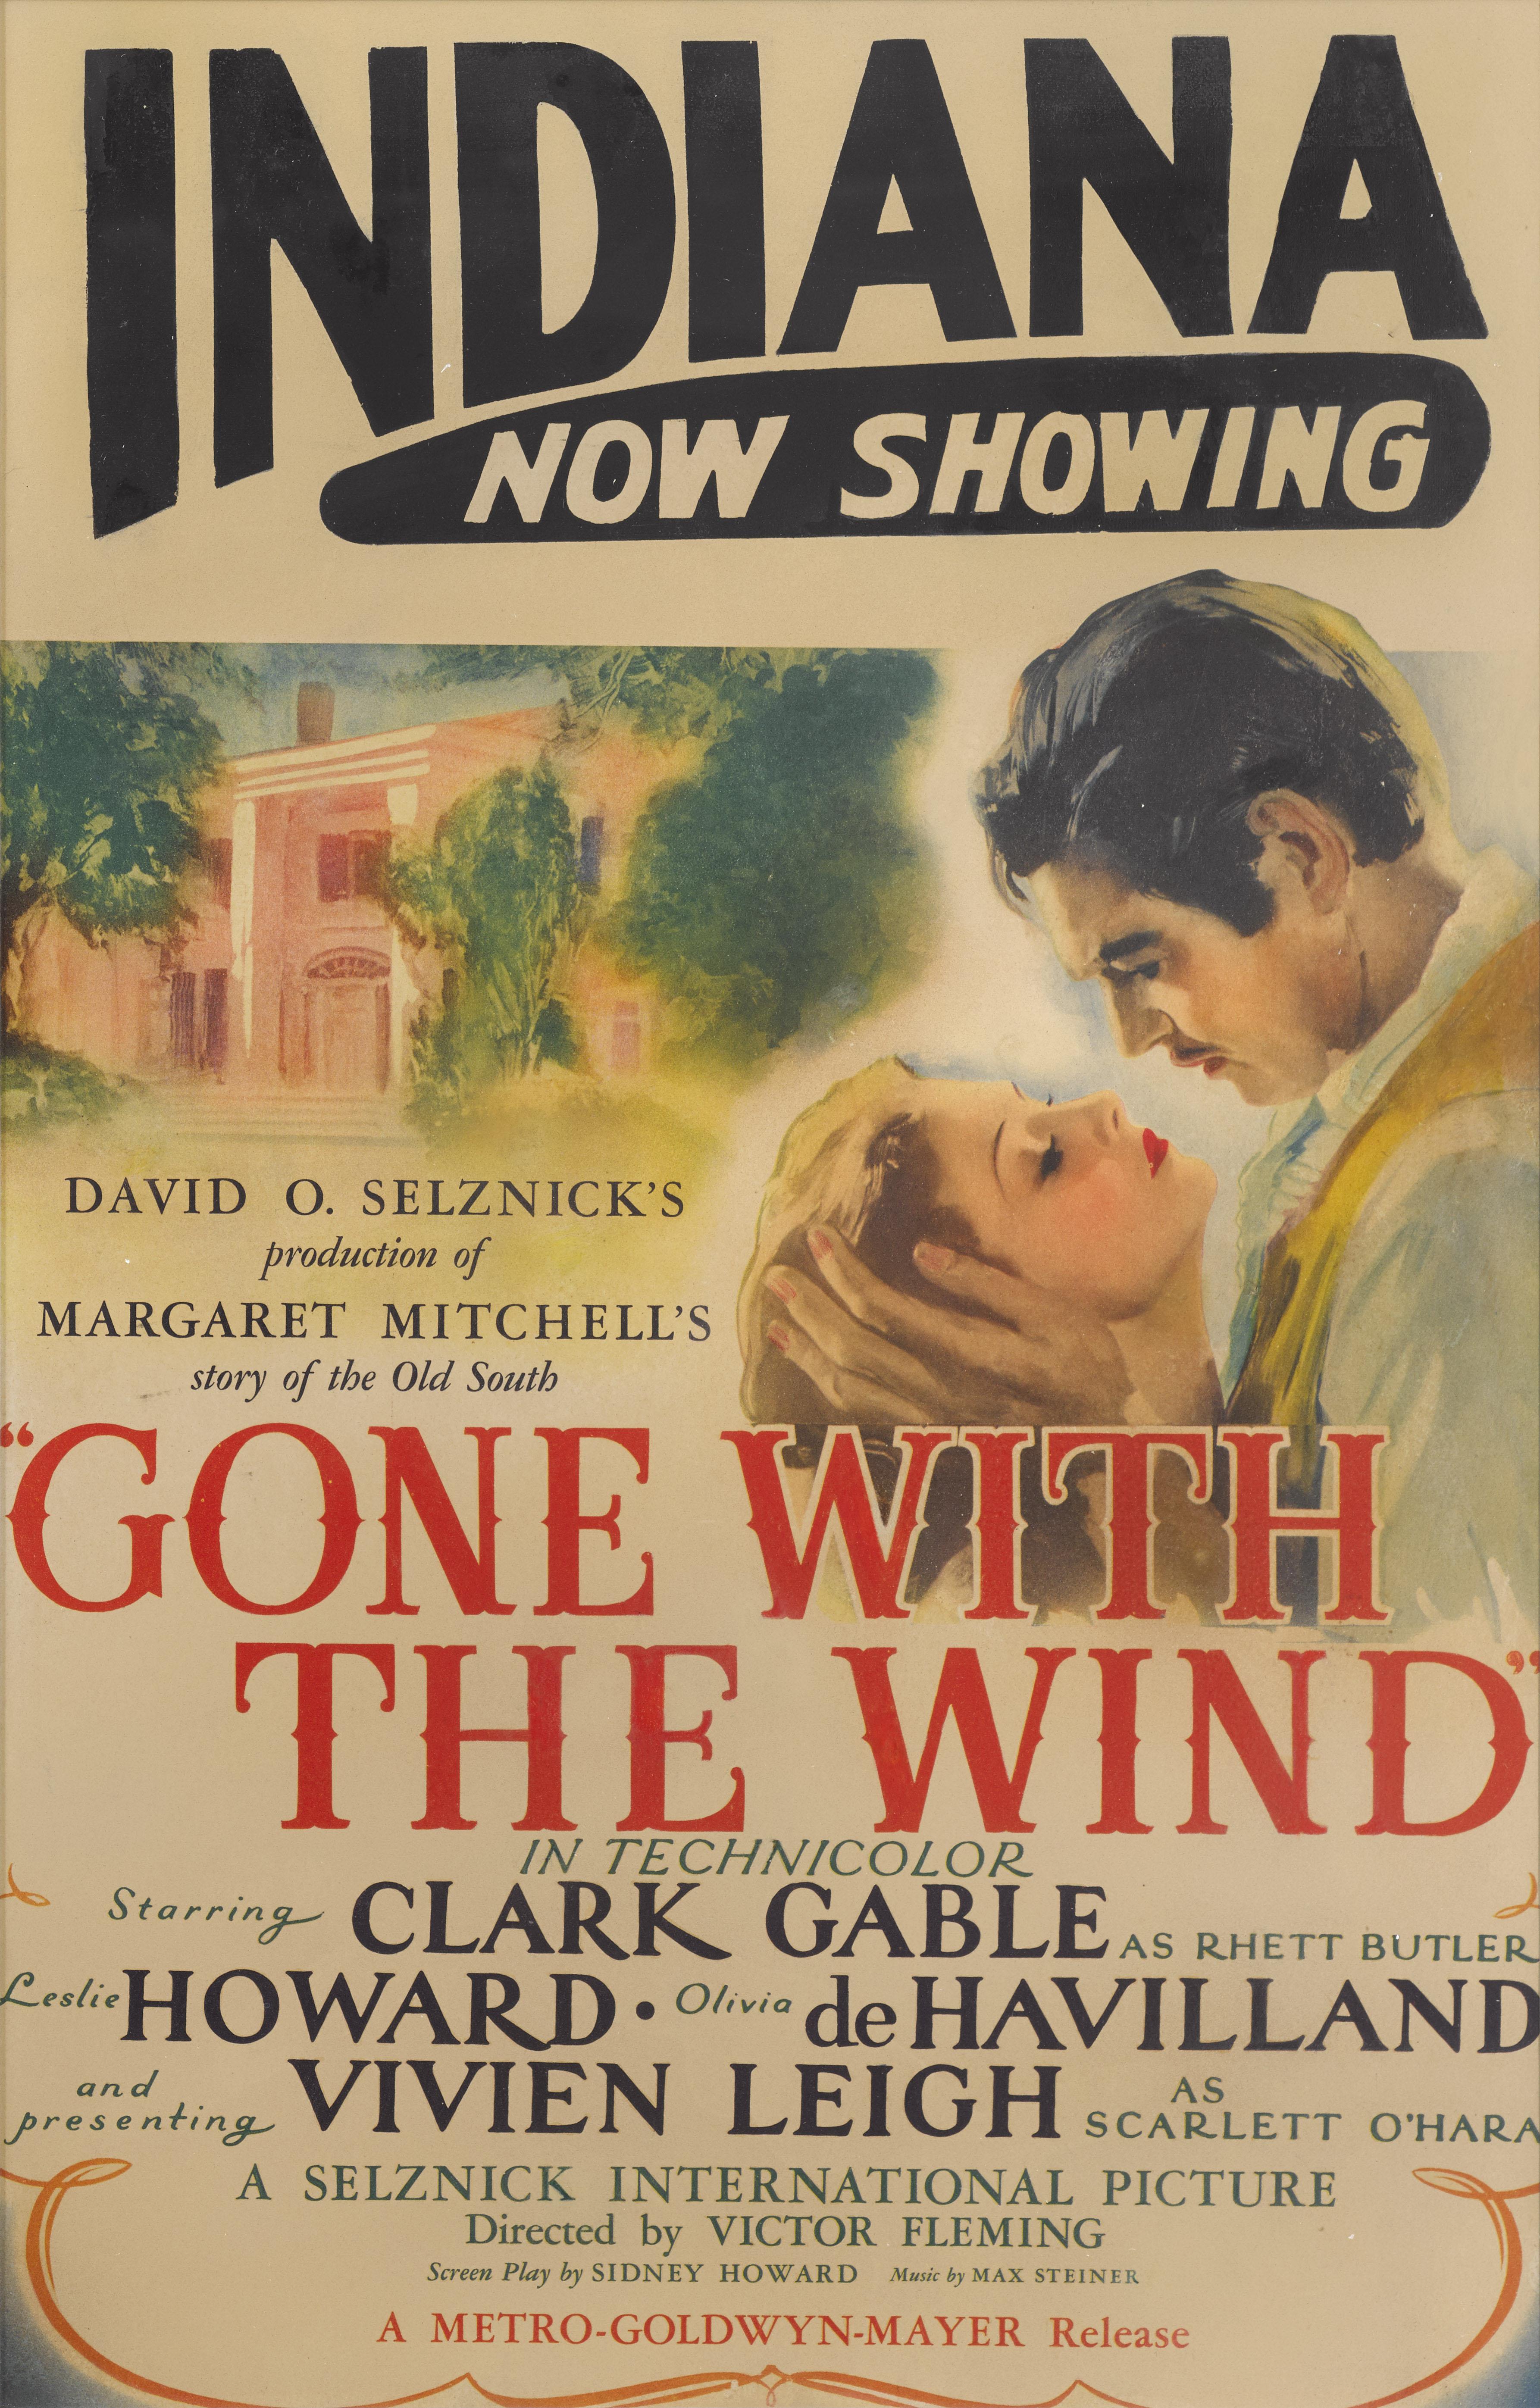 Original US film poster for the landmark, 1939 film starring Clark Gable, Vivien Leigh and directed by Victor Fleming, George Cukor and Sam Wood. Original posters on this legendary title are highly sort after by collectors. This size poster was